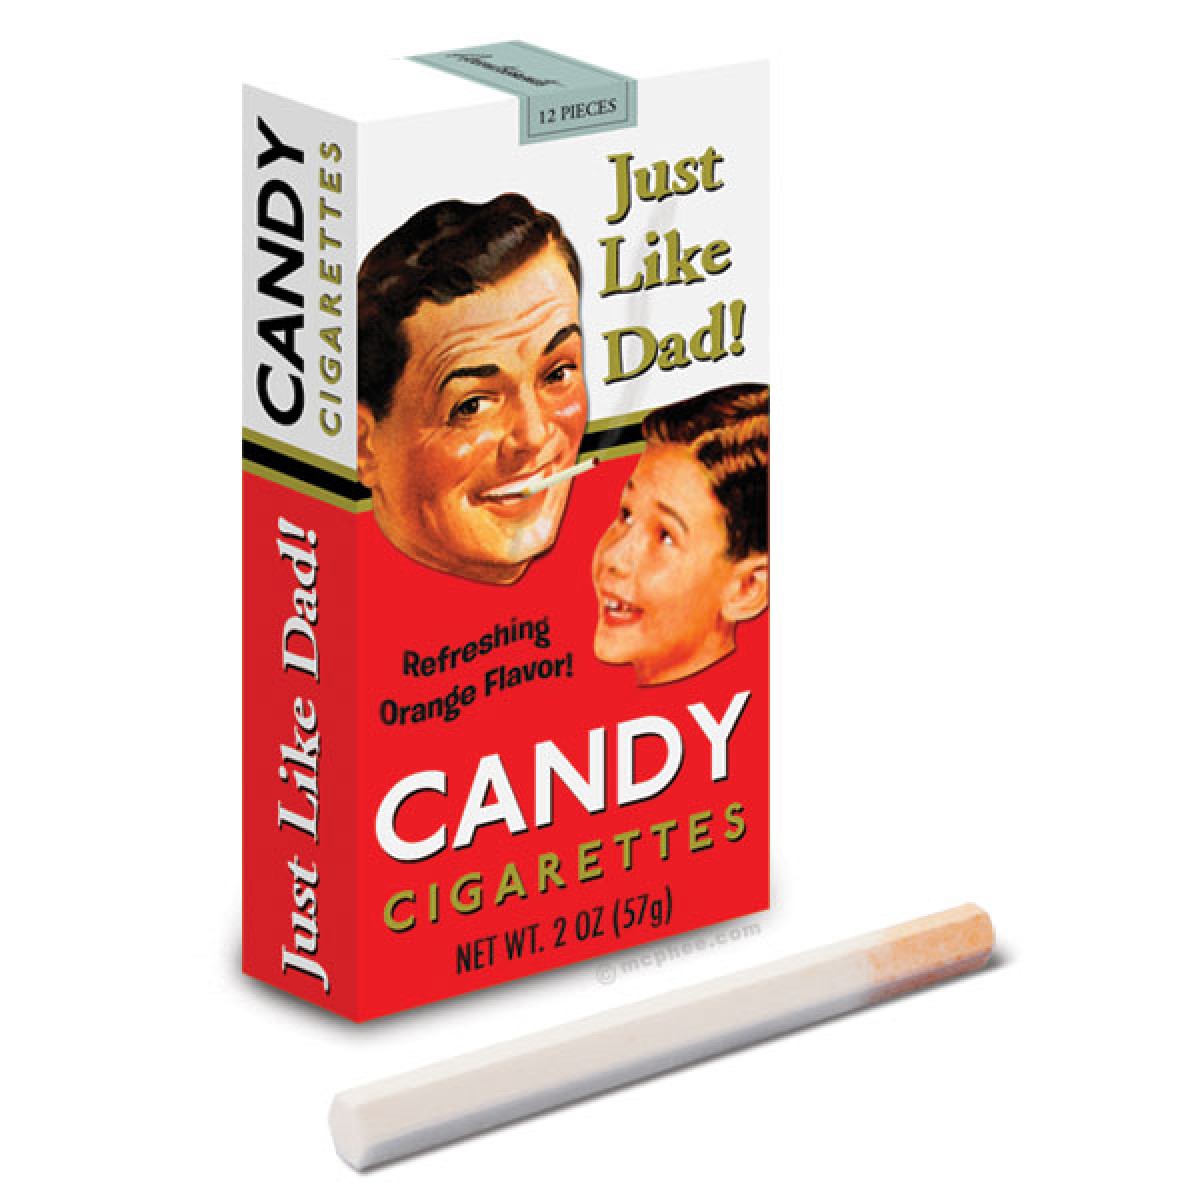 Candy cigarettes. Just Like Dad!